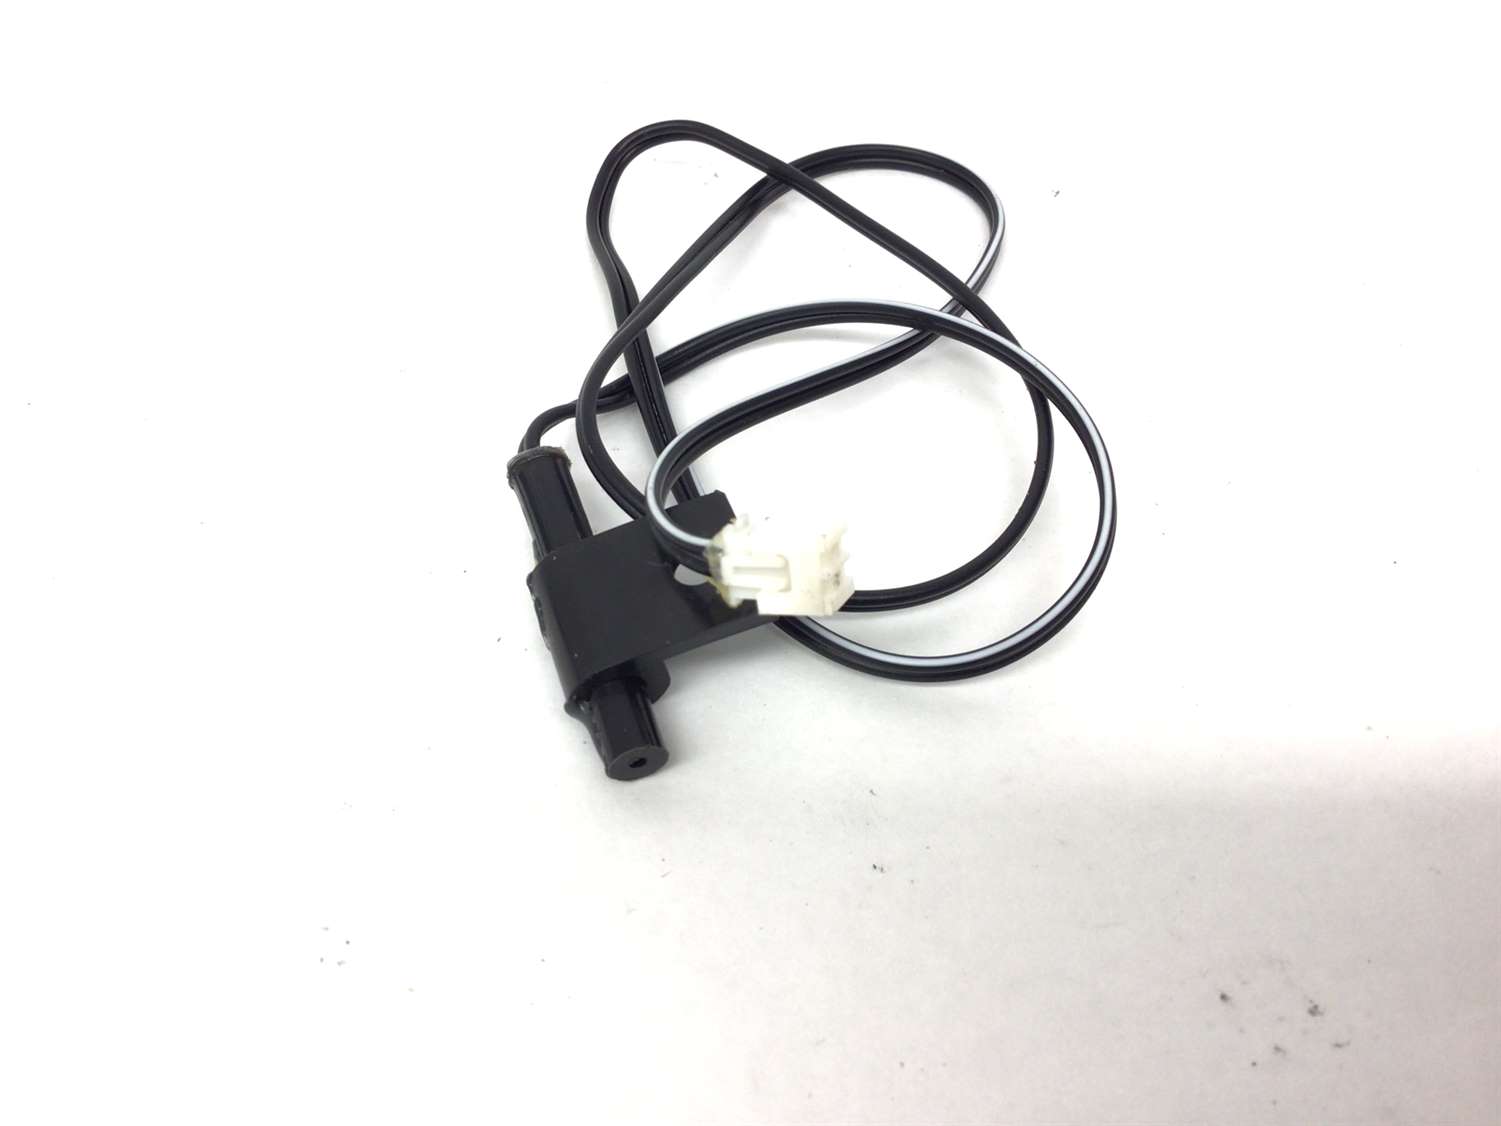 RPM Speed Sensor Reed Switch 2 Terminal Wire (Used)